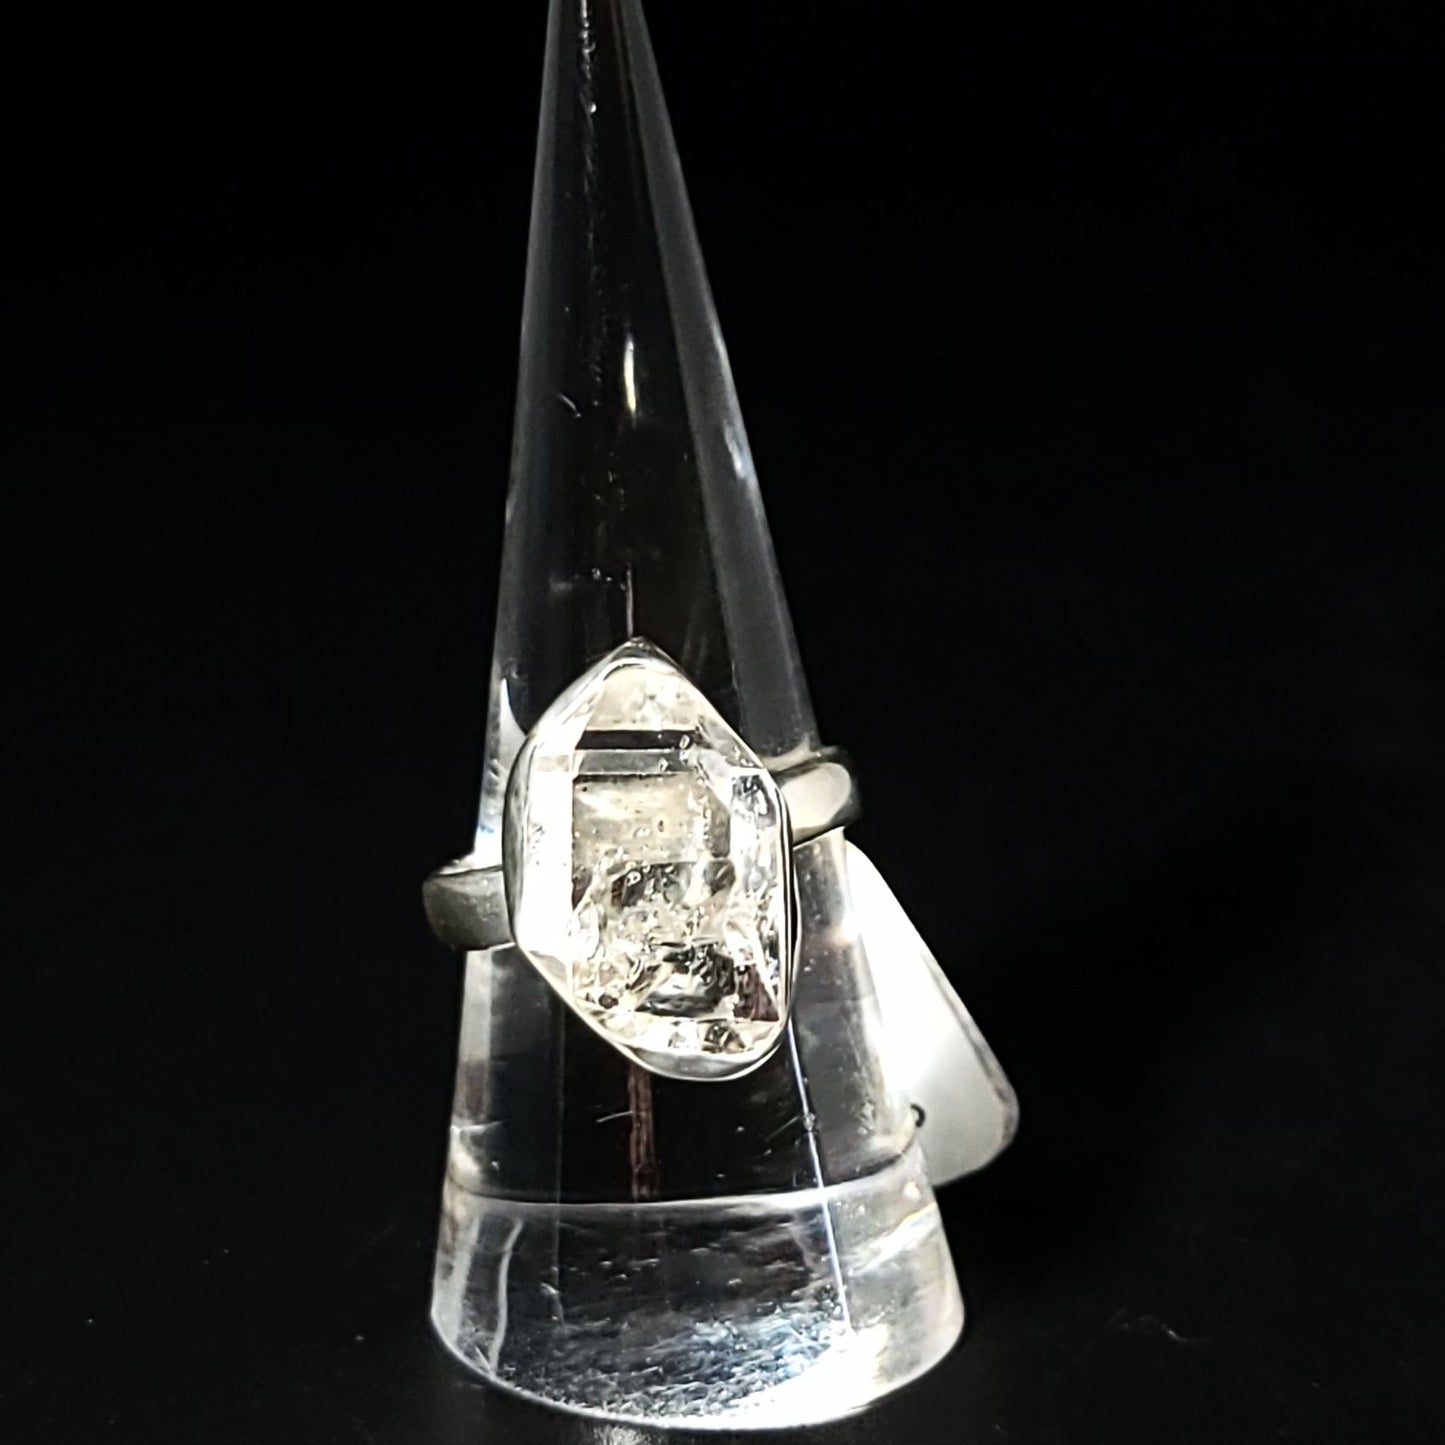 Herkimer Diamond Solitaire Ring Sterling Silver Band Rainbow HQ - Elevated Metaphysical